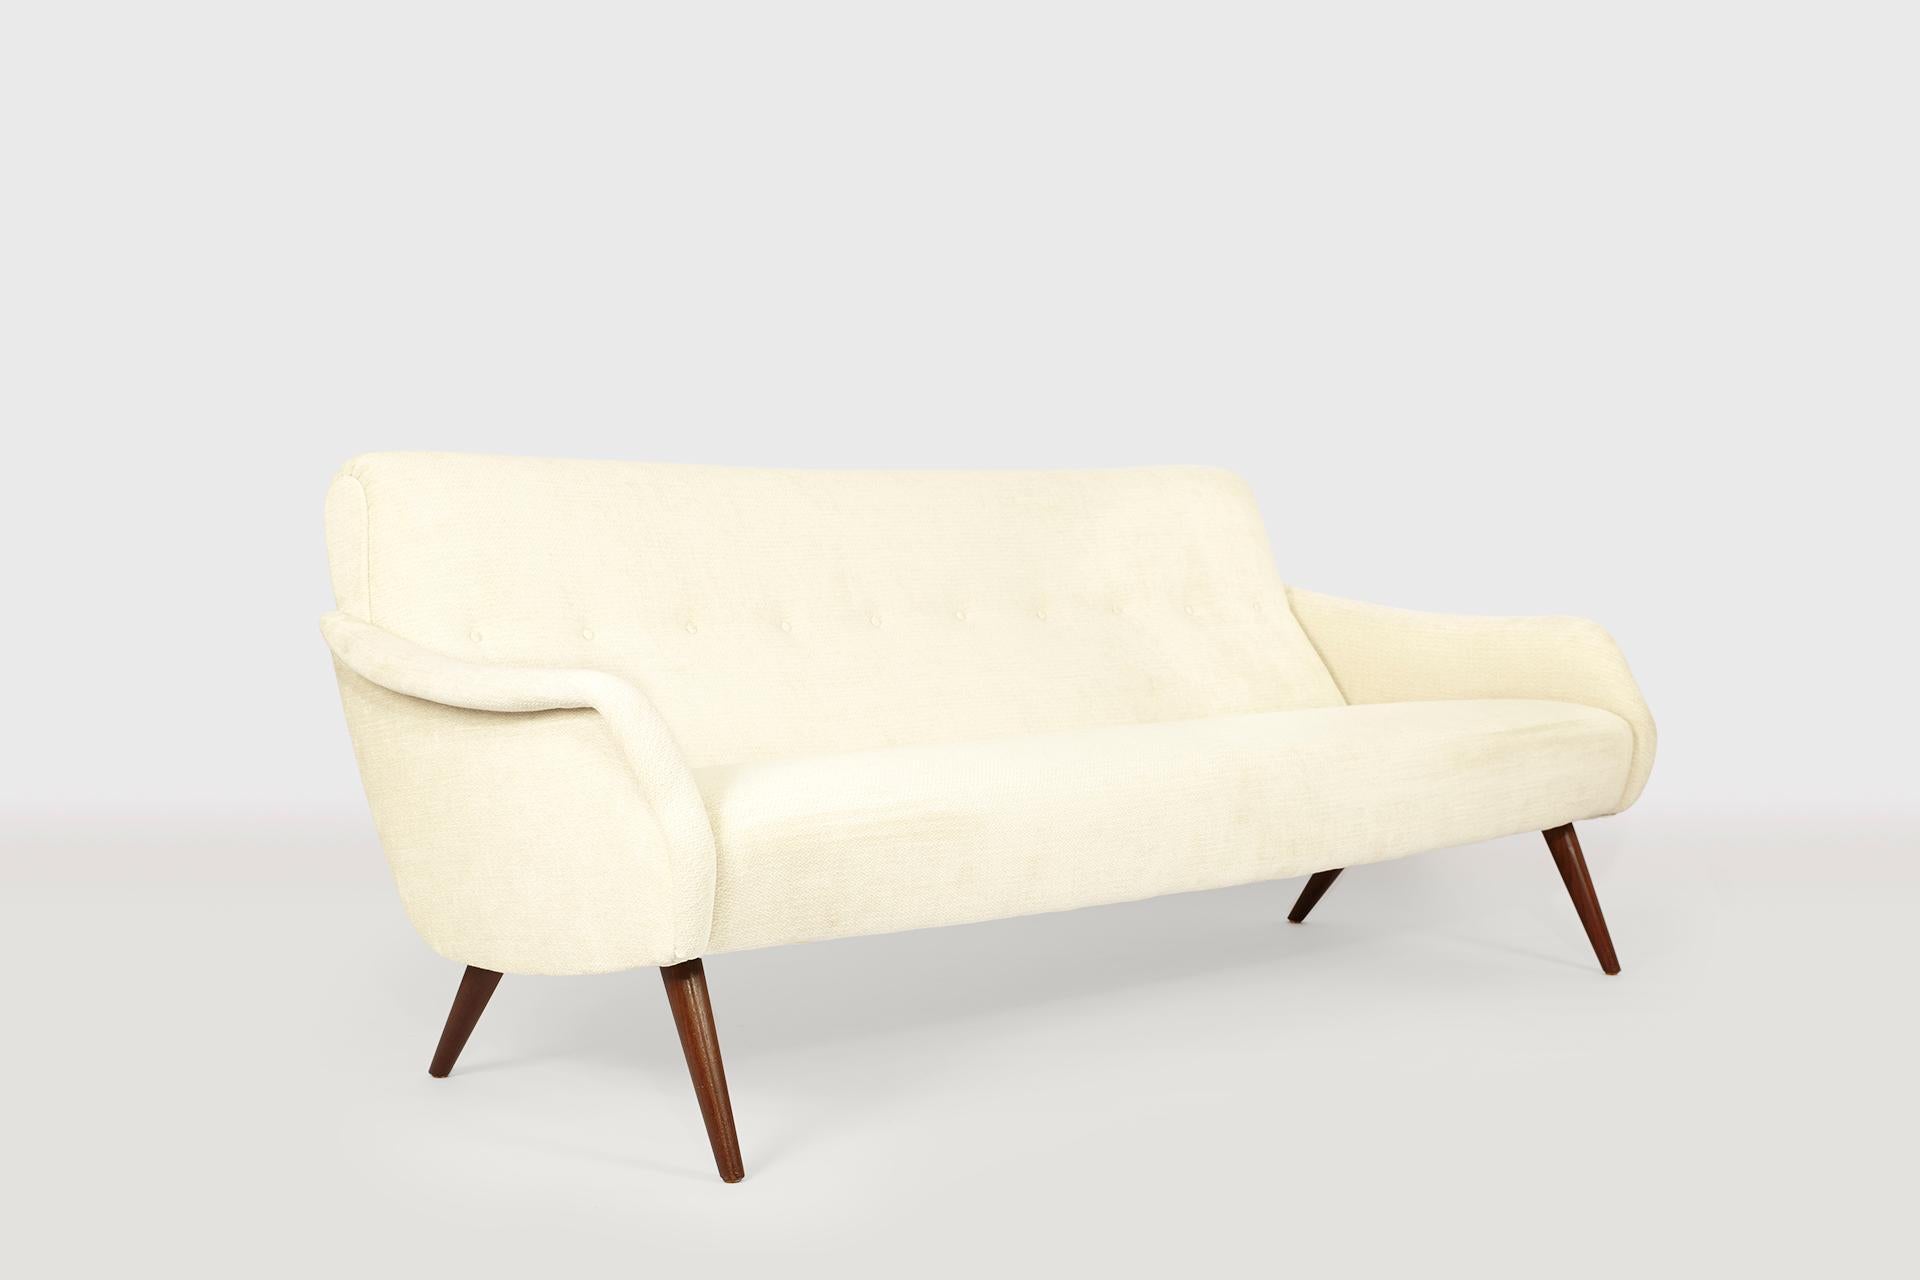 This rare and highly elegant sofa features stunning comfort and impeccable style. This unique piece has wooden legs and unique sculptured armrests. The shaping of the piece could be the Scandinavian pendant to the Italian MarCo Zanusos armchairs.